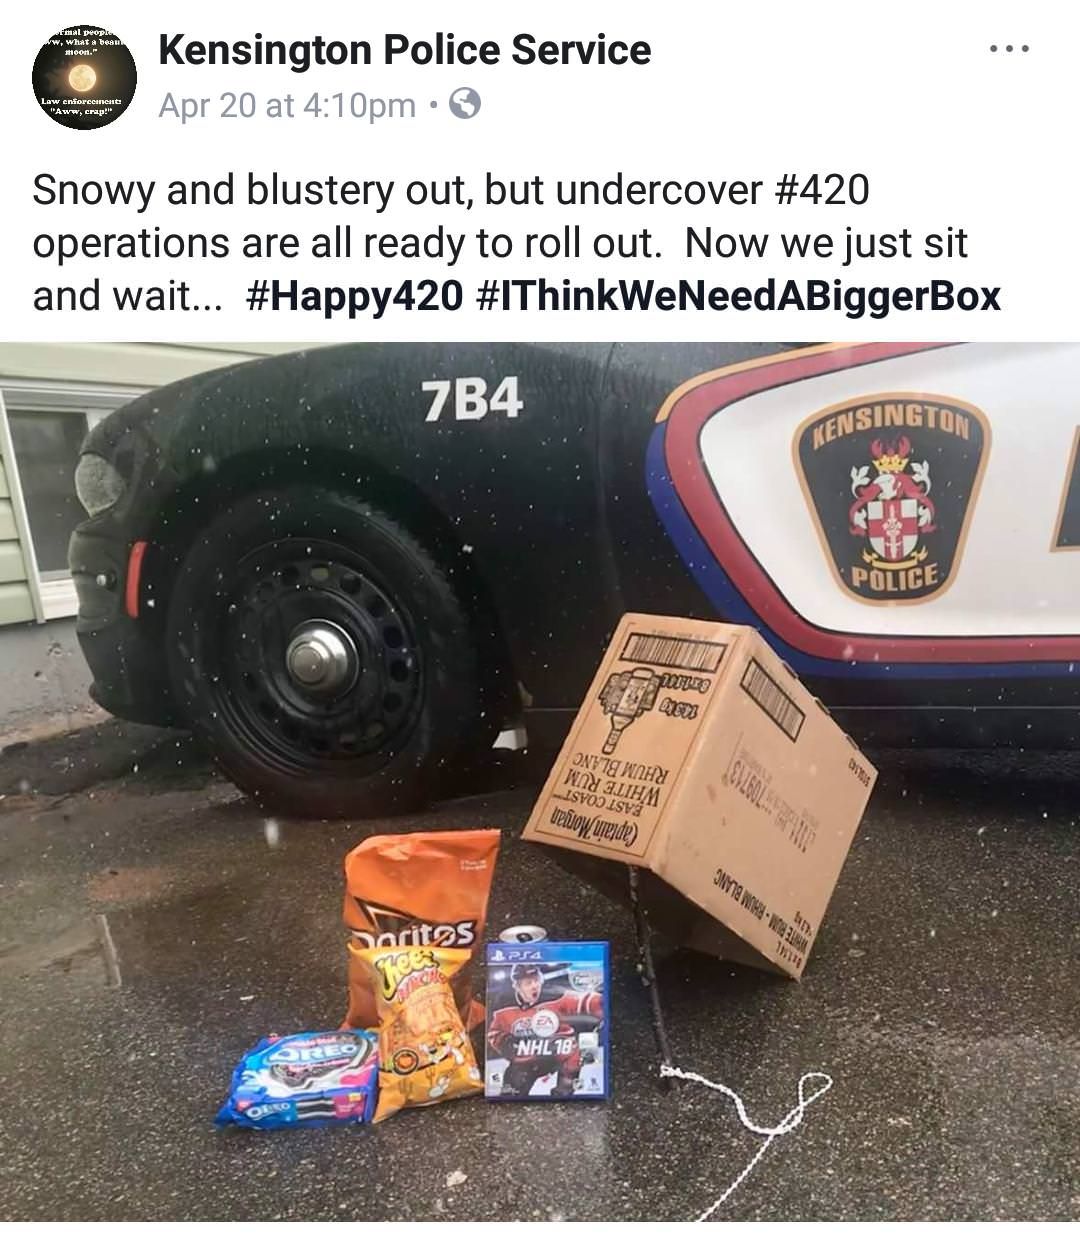 Police in Prince Edward Island had a sense of humour about 420